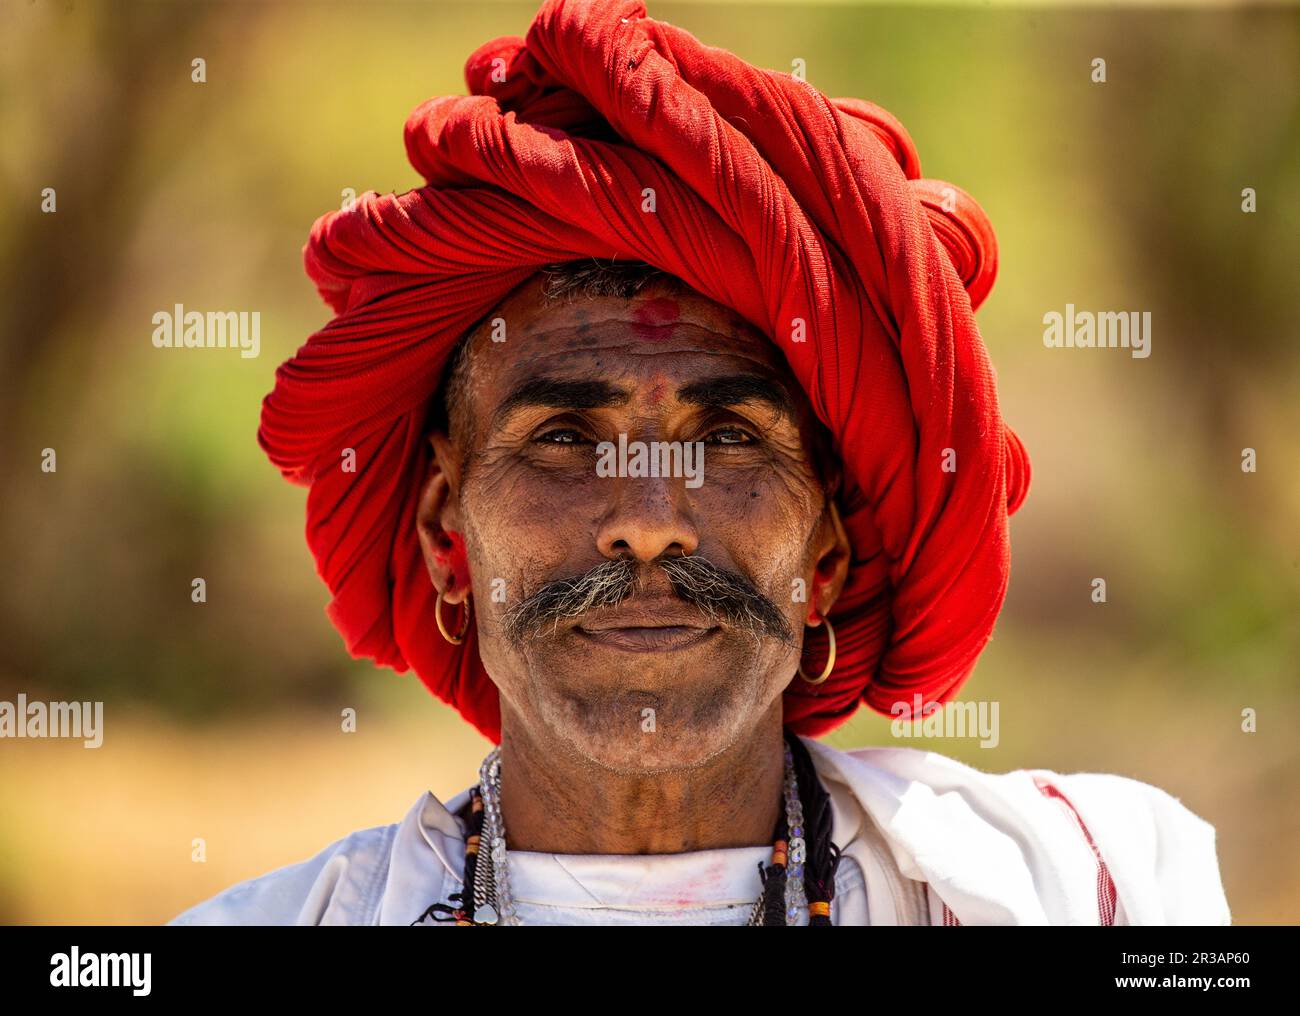 Portrait of a man of the Rabari ethnic group in a national headdress and traditional dress with national ornaments. Stock Photo